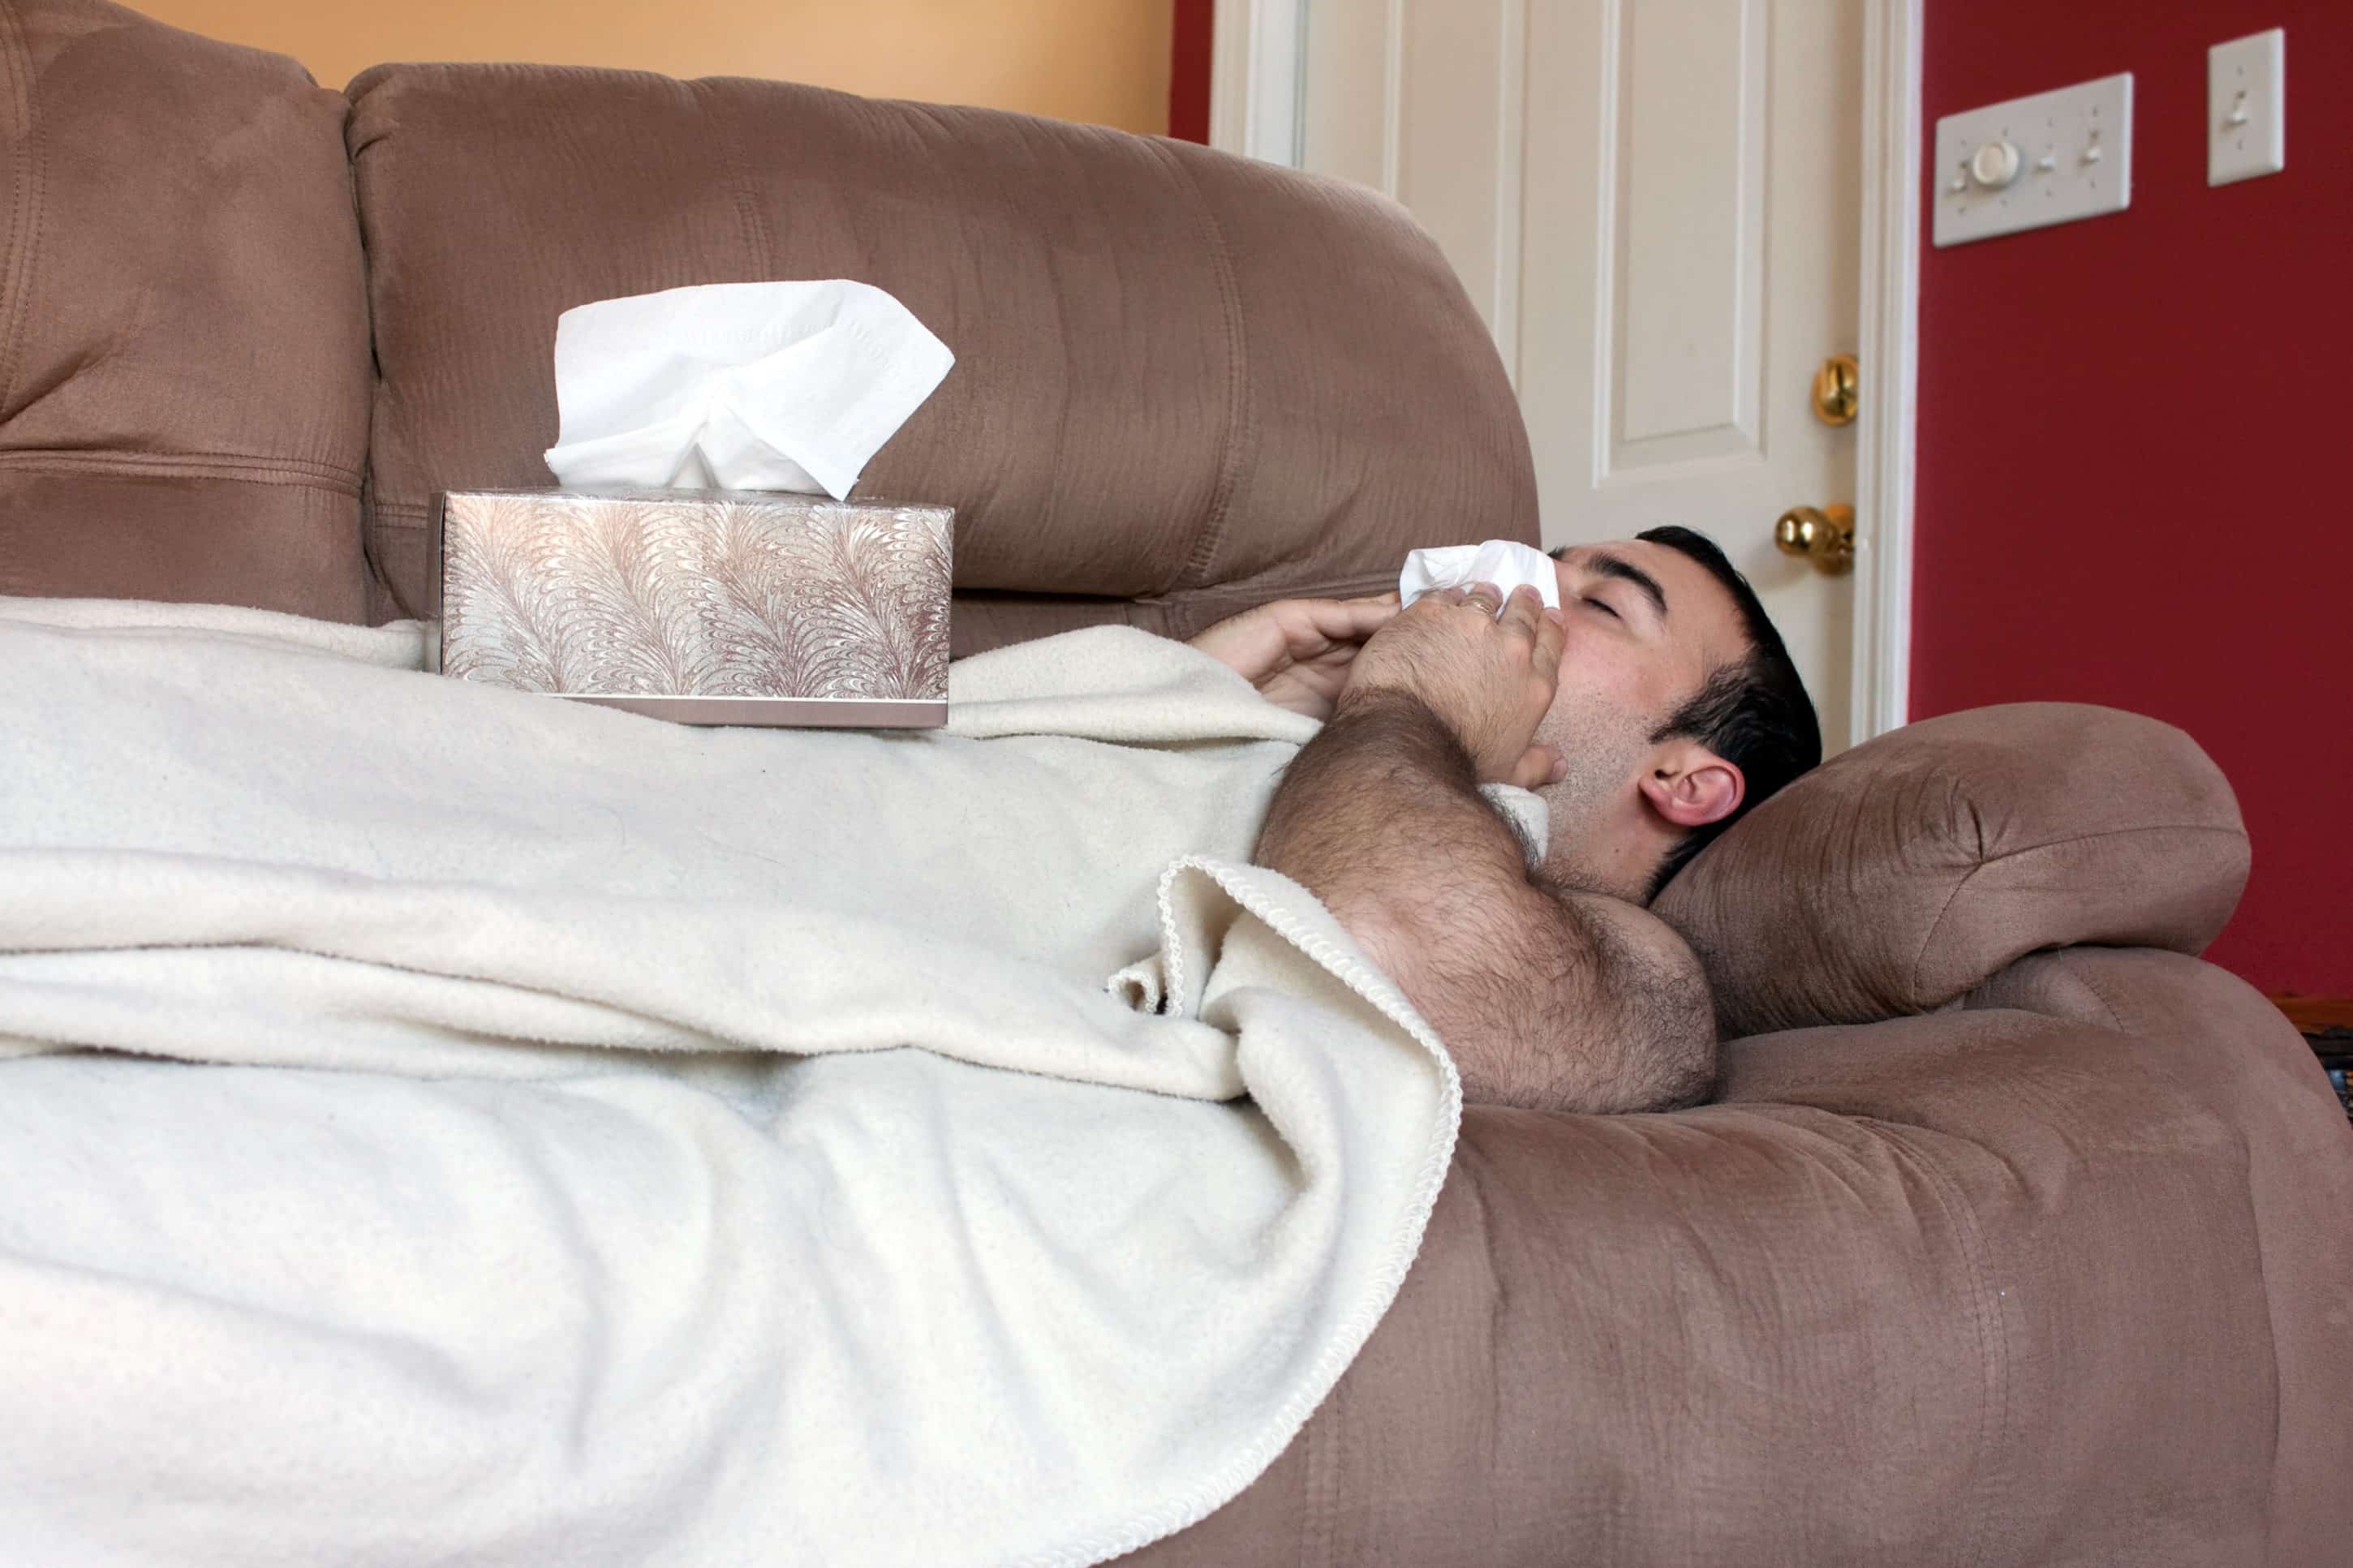 A young adult sick on the couch at home blows his nose with a tissue